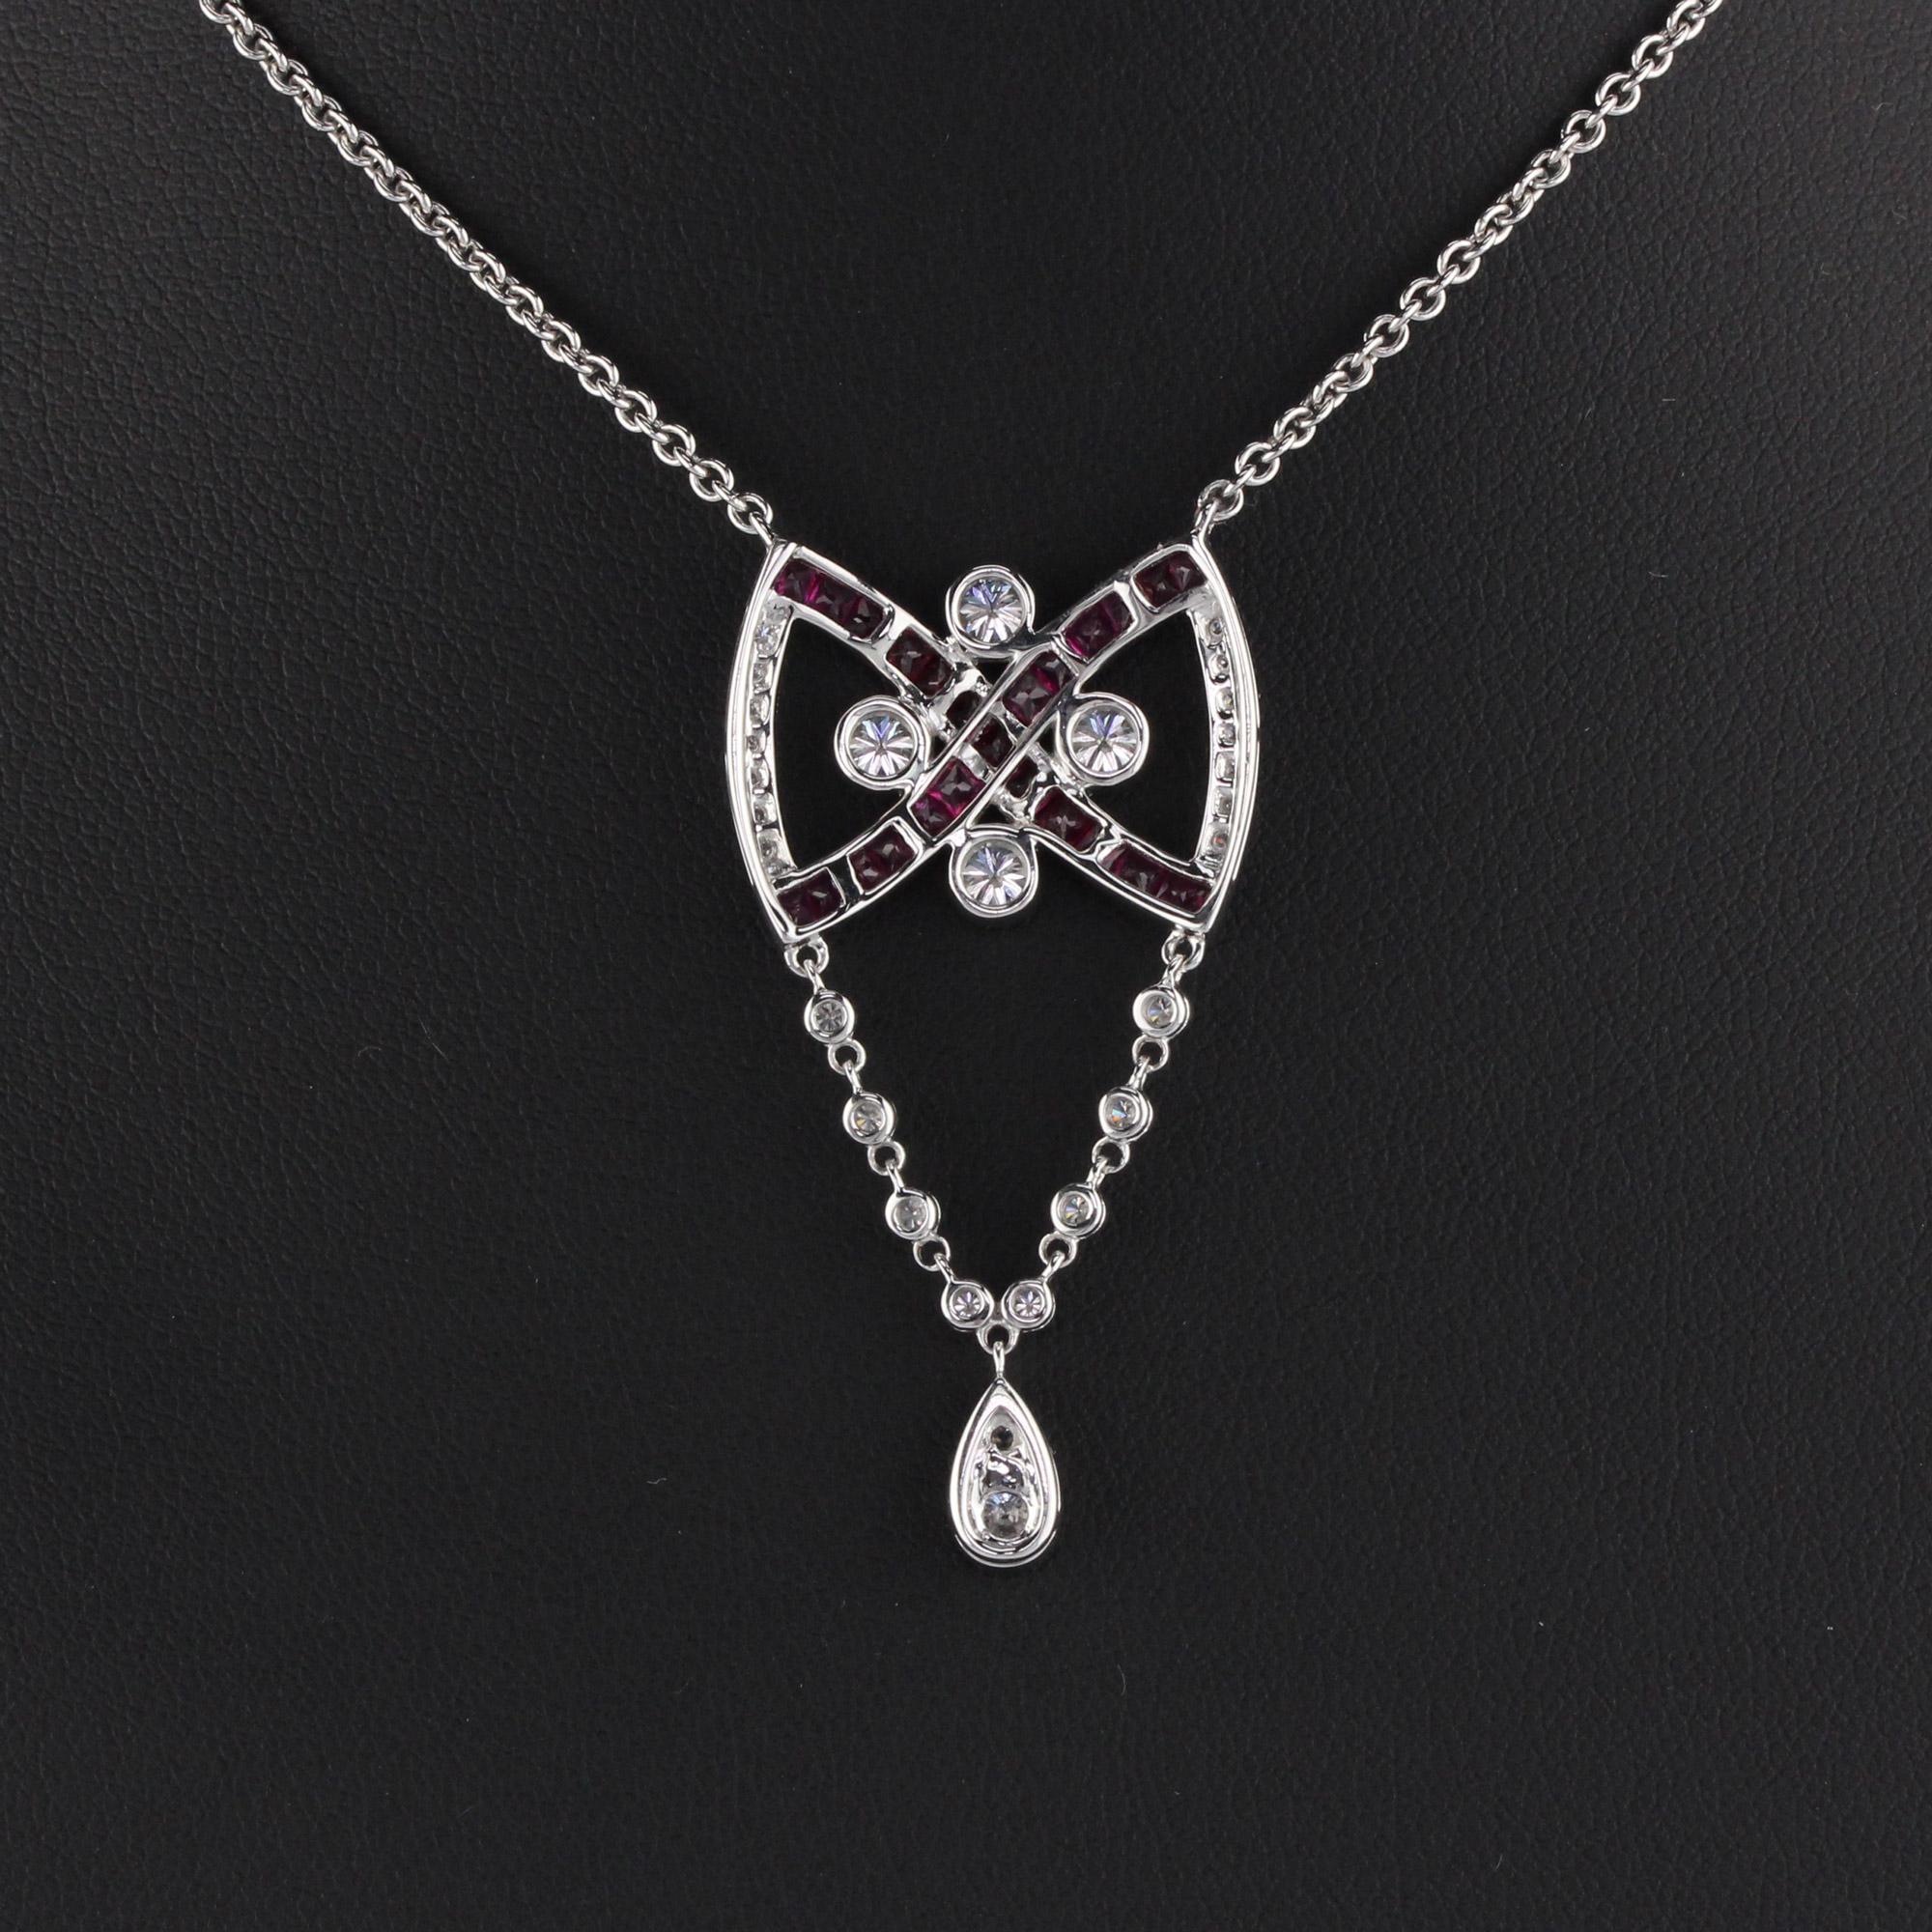 Vintage Estate 18 Karat White Gold Diamond and Ruby Necklace In Good Condition For Sale In Great Neck, NY